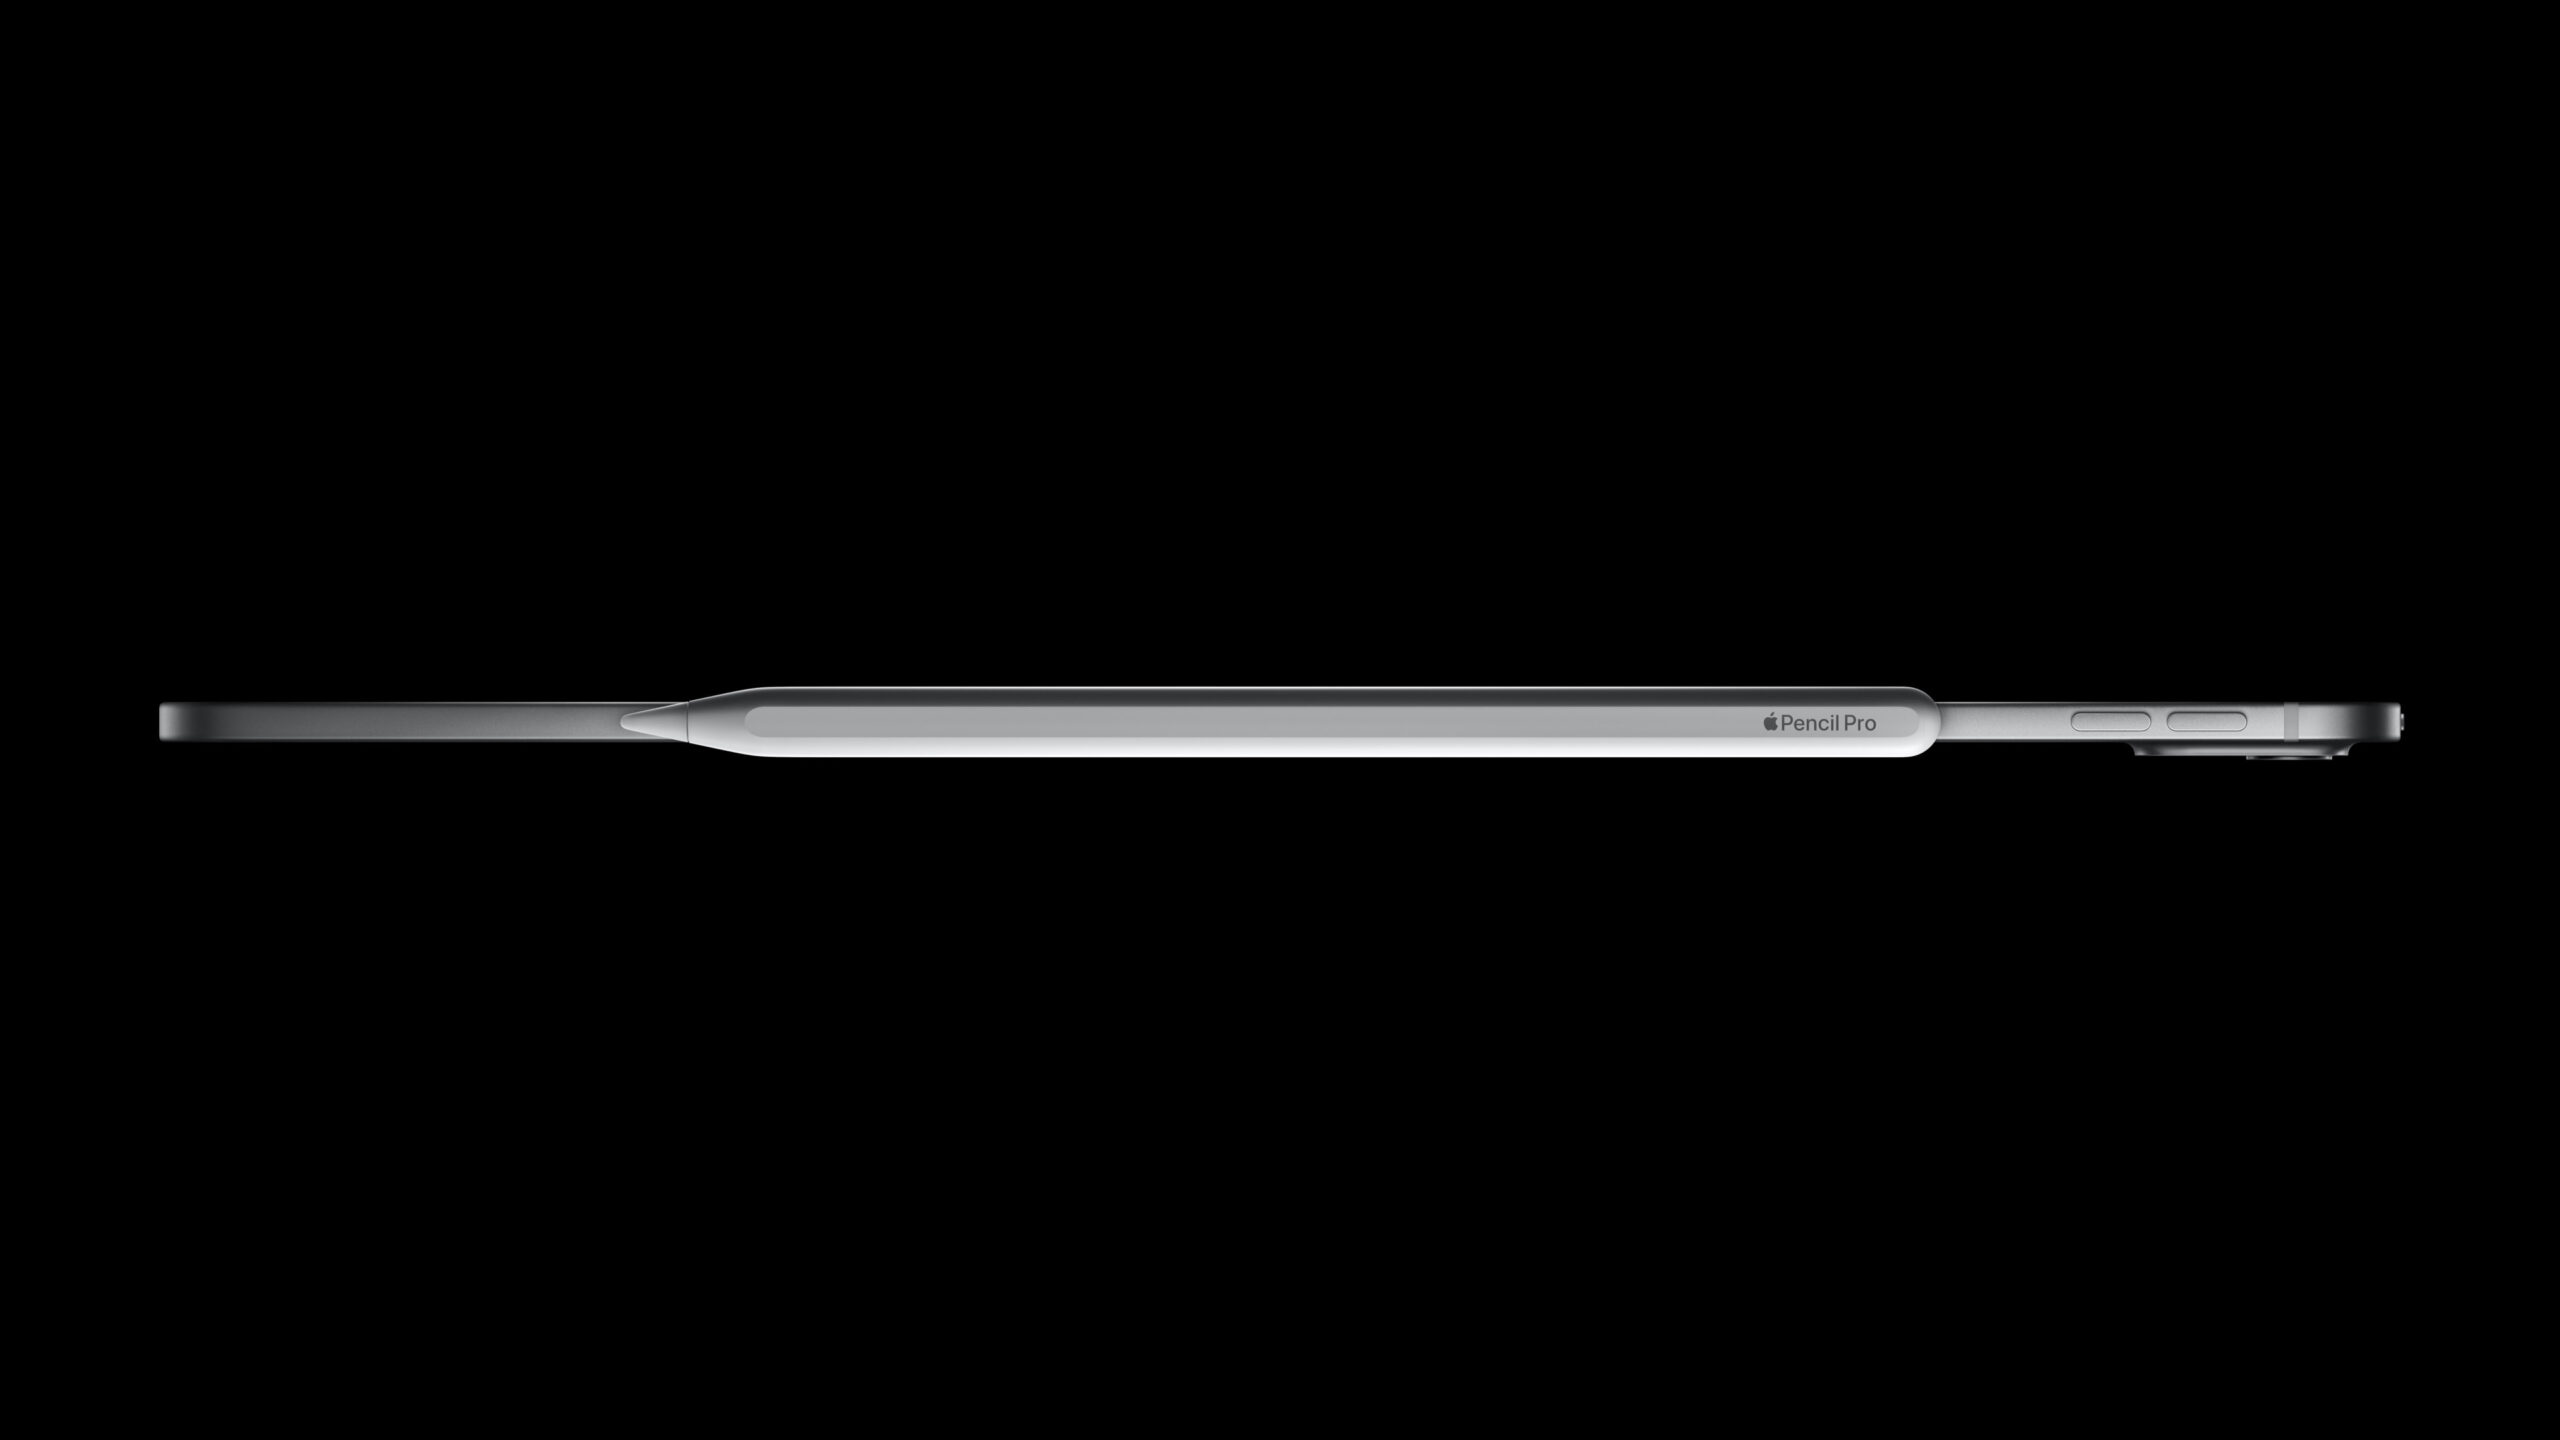 The new Apple Pencil Pro sitting on top of the new iPad Pro.